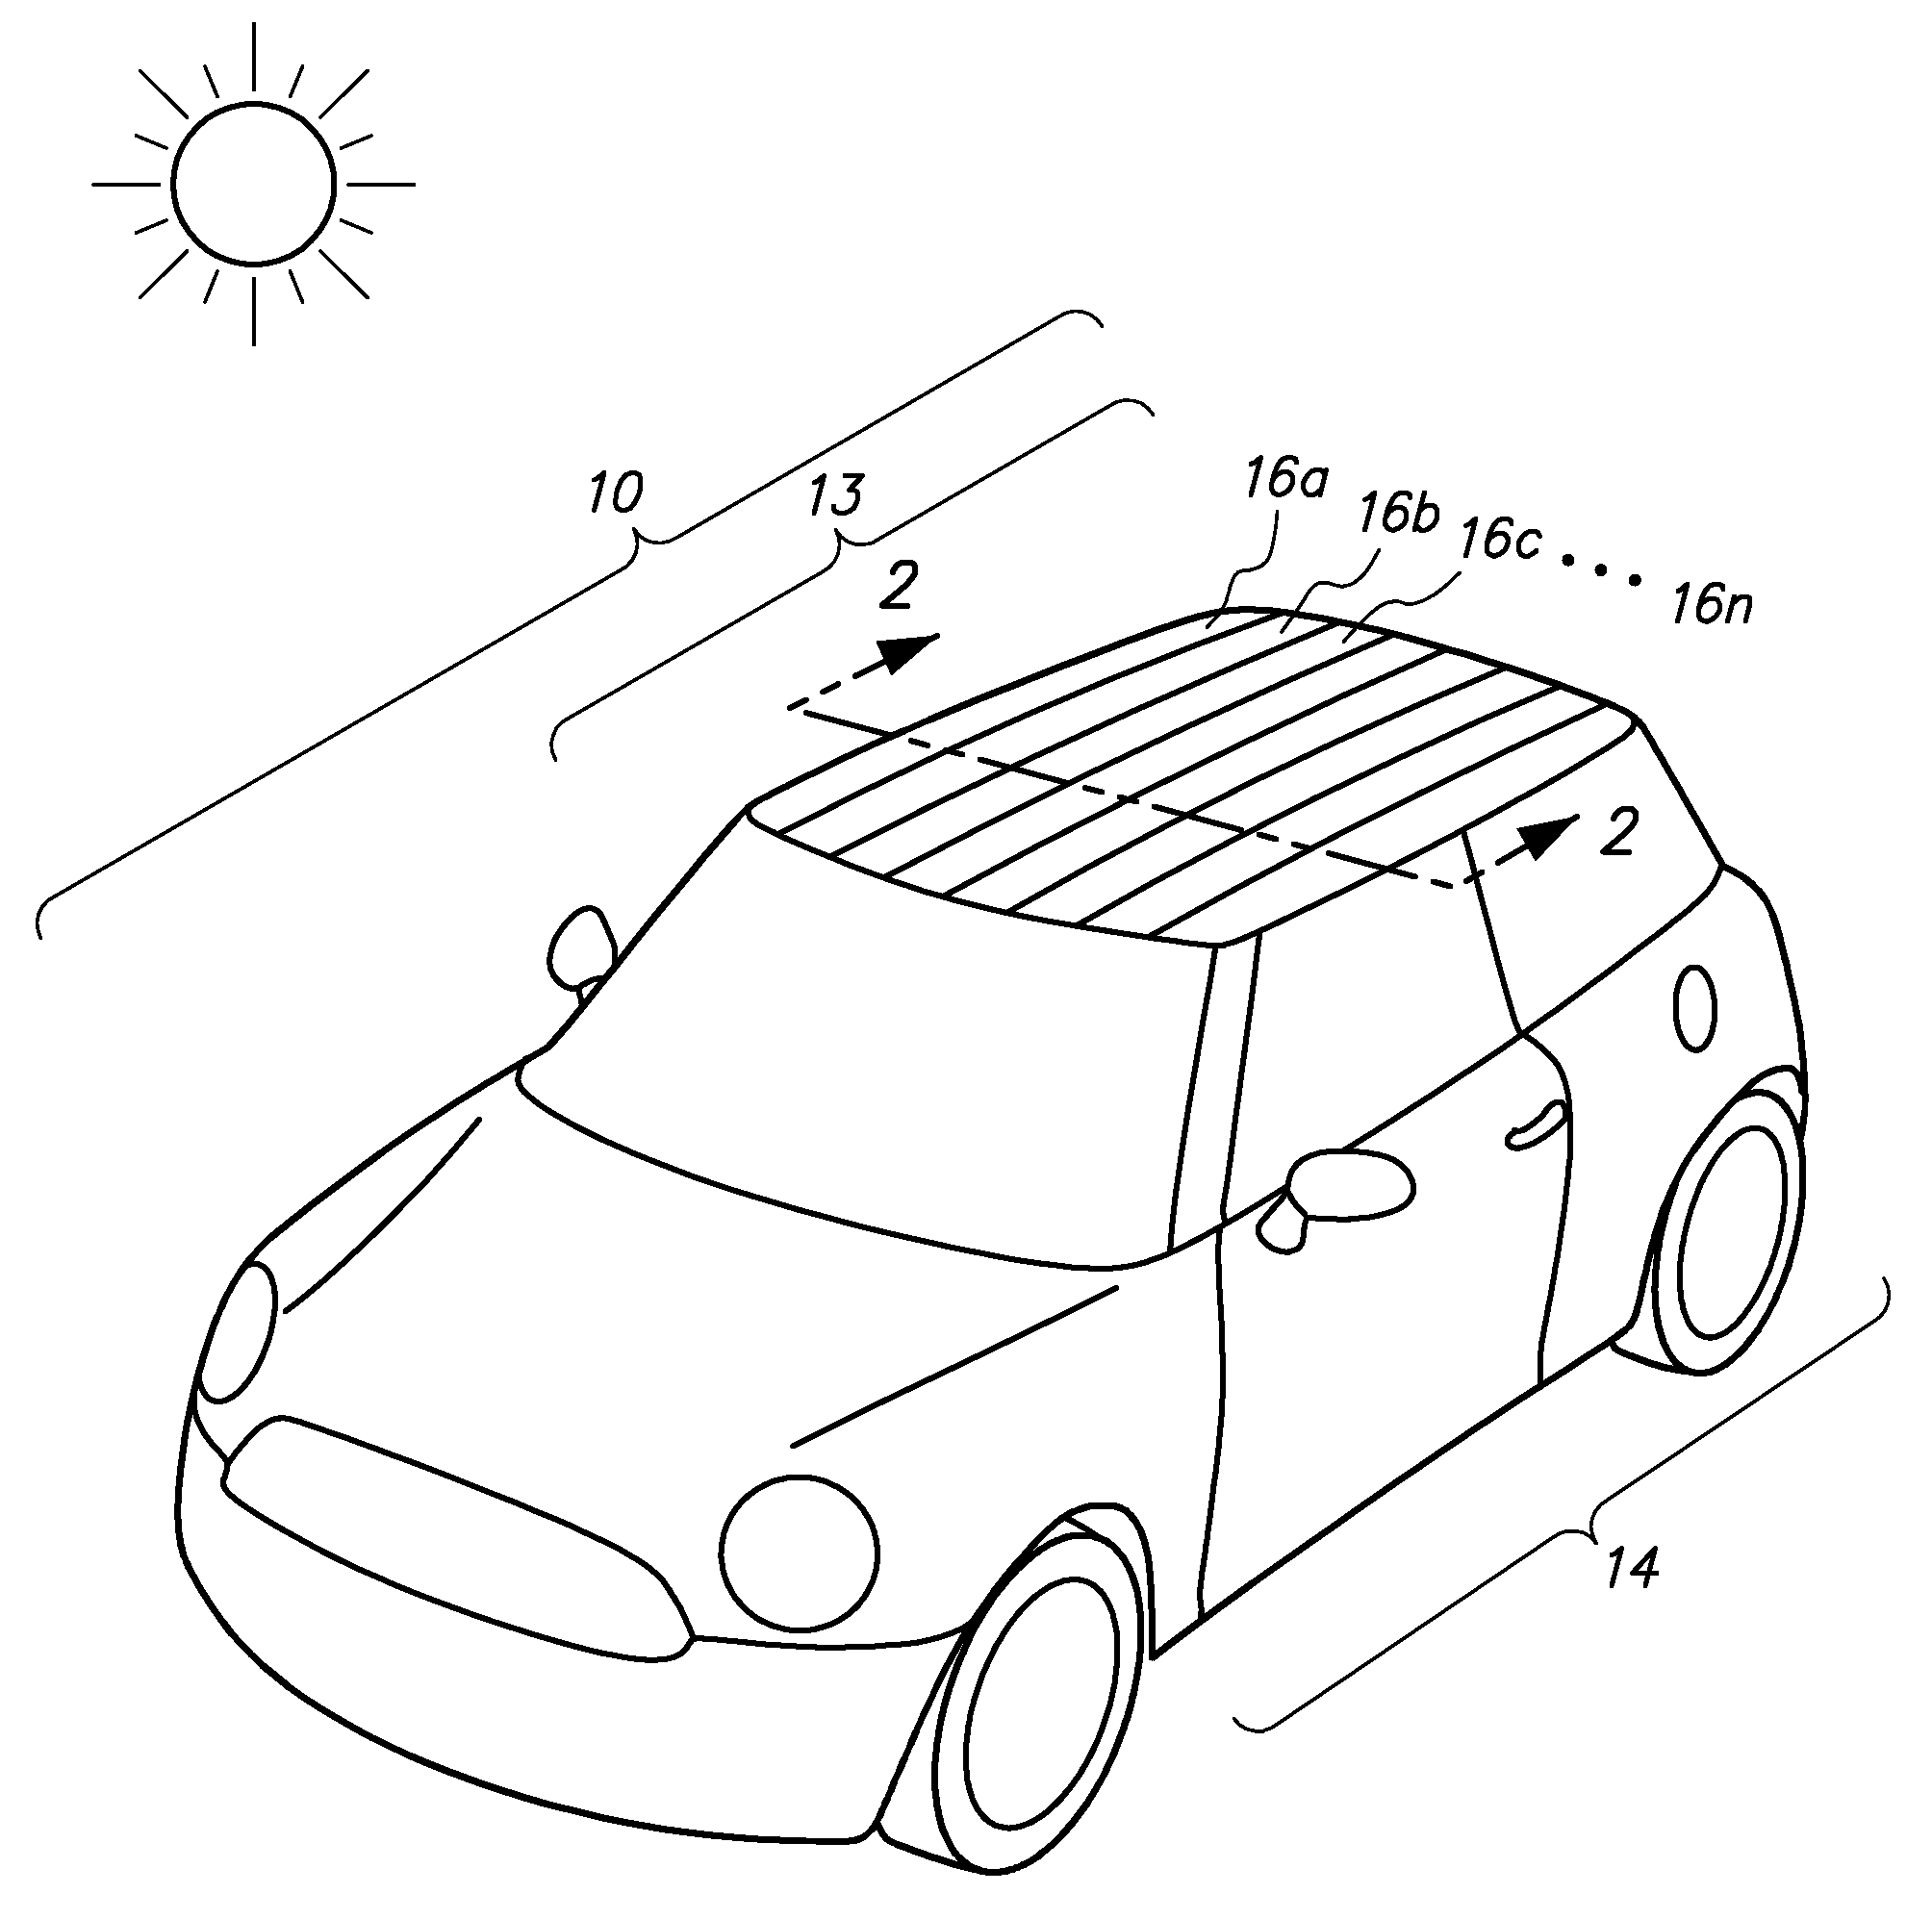 Automobiles having a radiant barrier